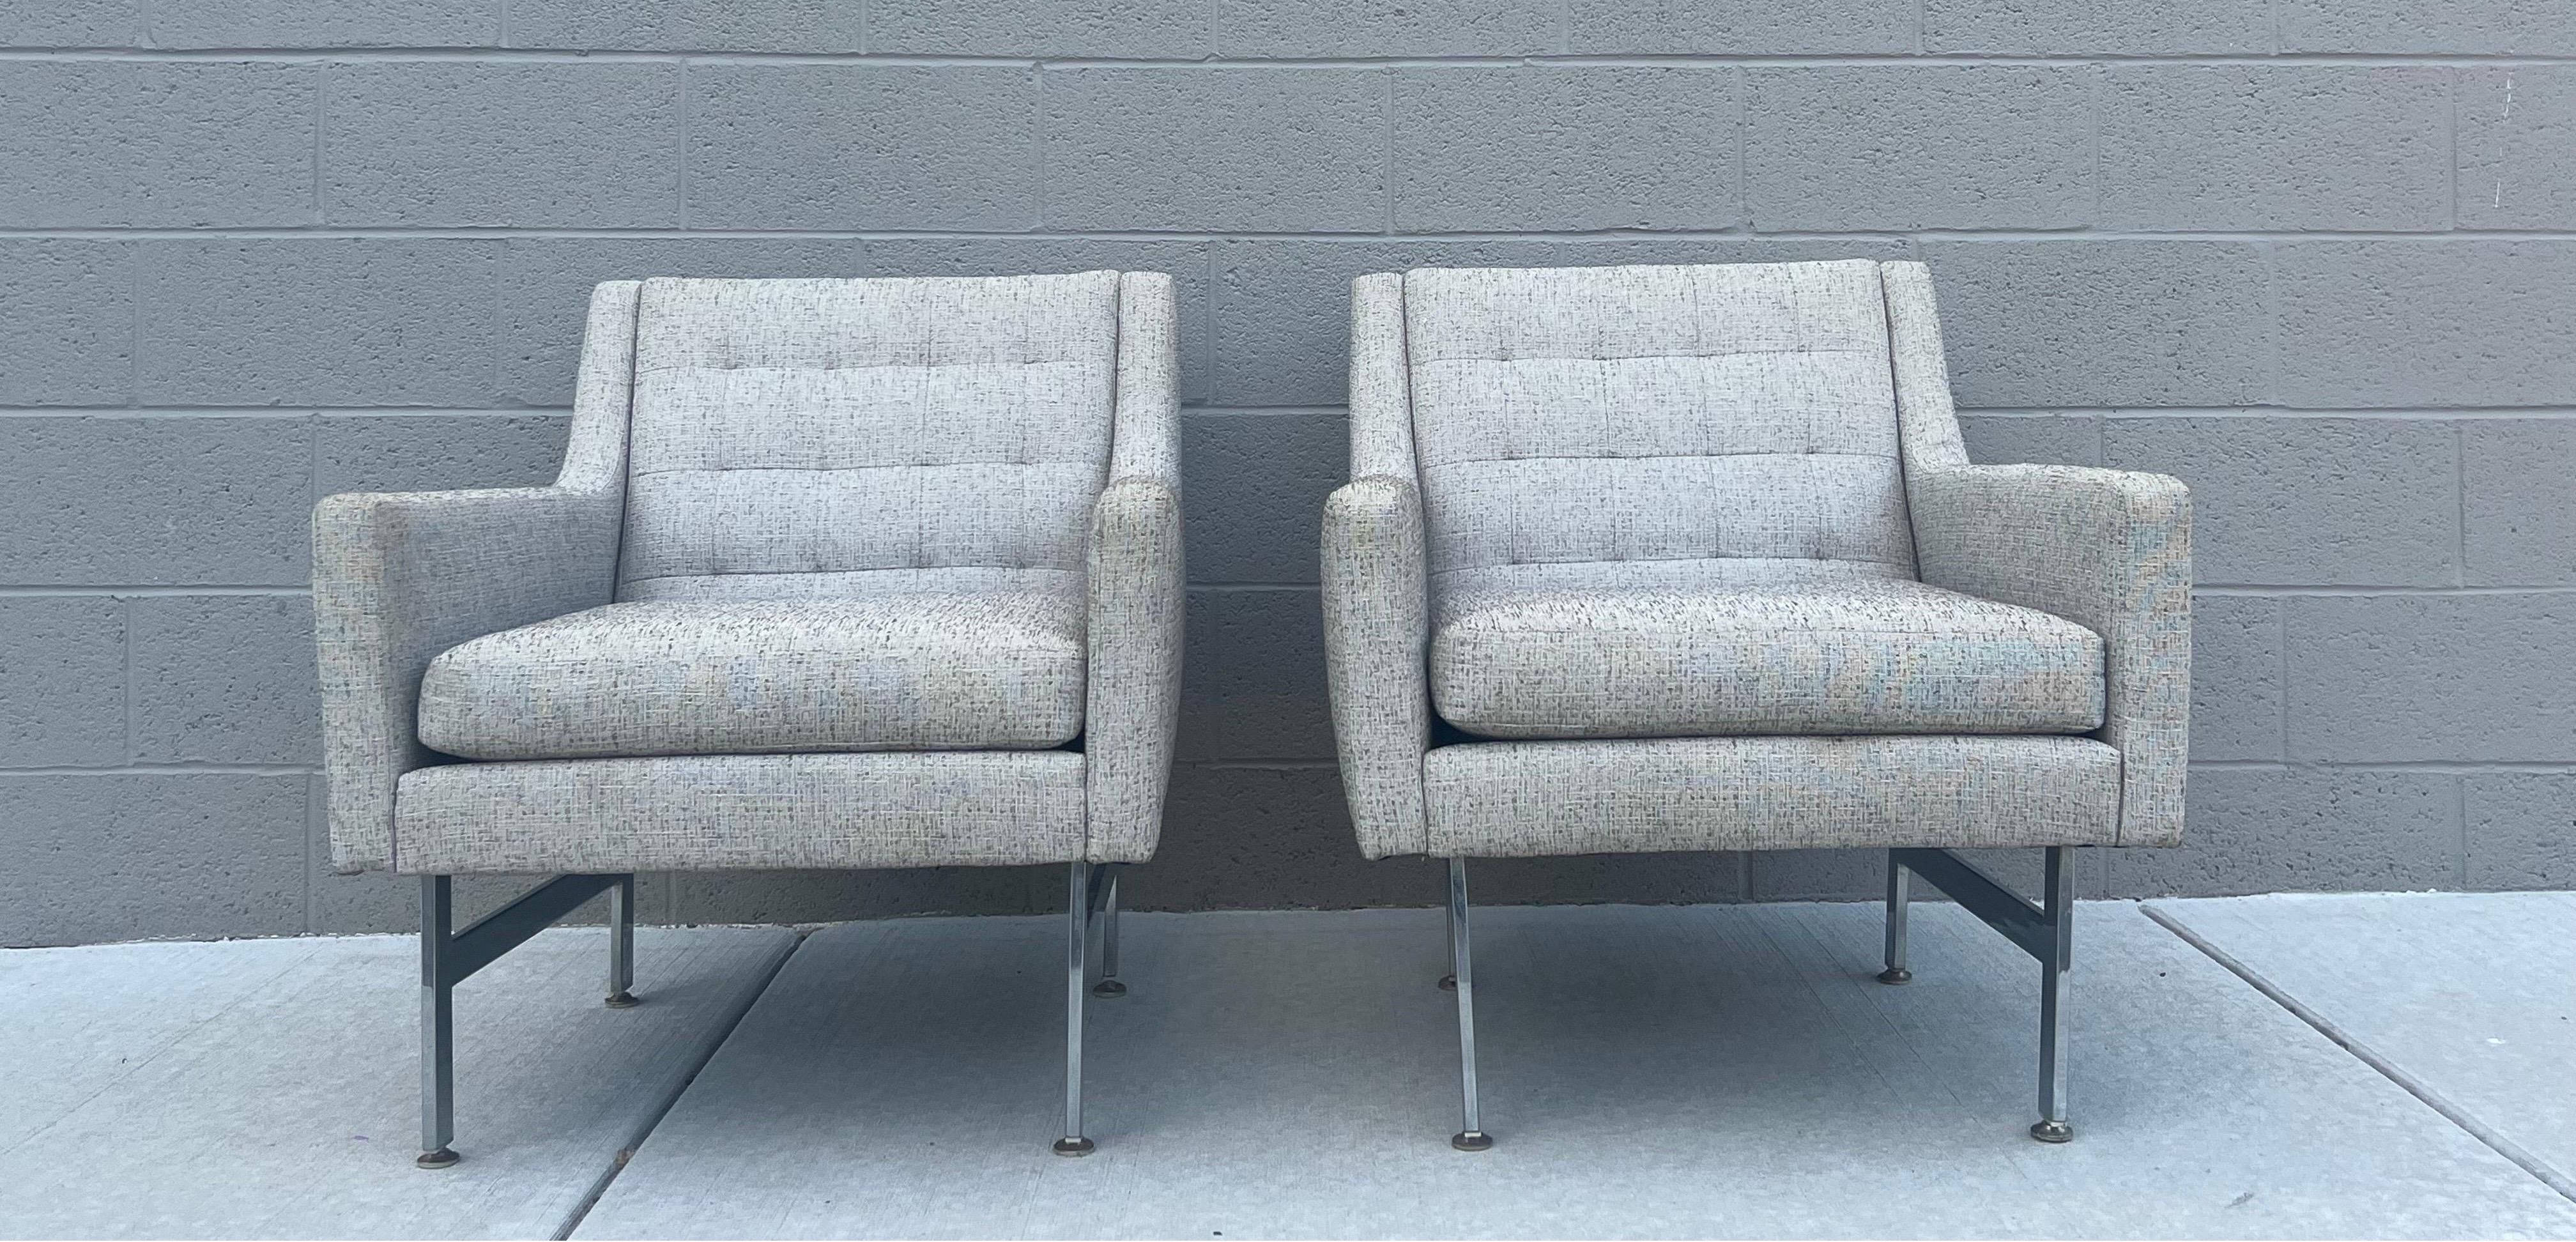 Mid-Century Modern pair of arm chairs. Boxy design with sleek side profile. Sits on chrome bar legs that are shorter towards the back to create a sloping angle and maximum comfort. These chairs have been reupholstered from the original fabric.